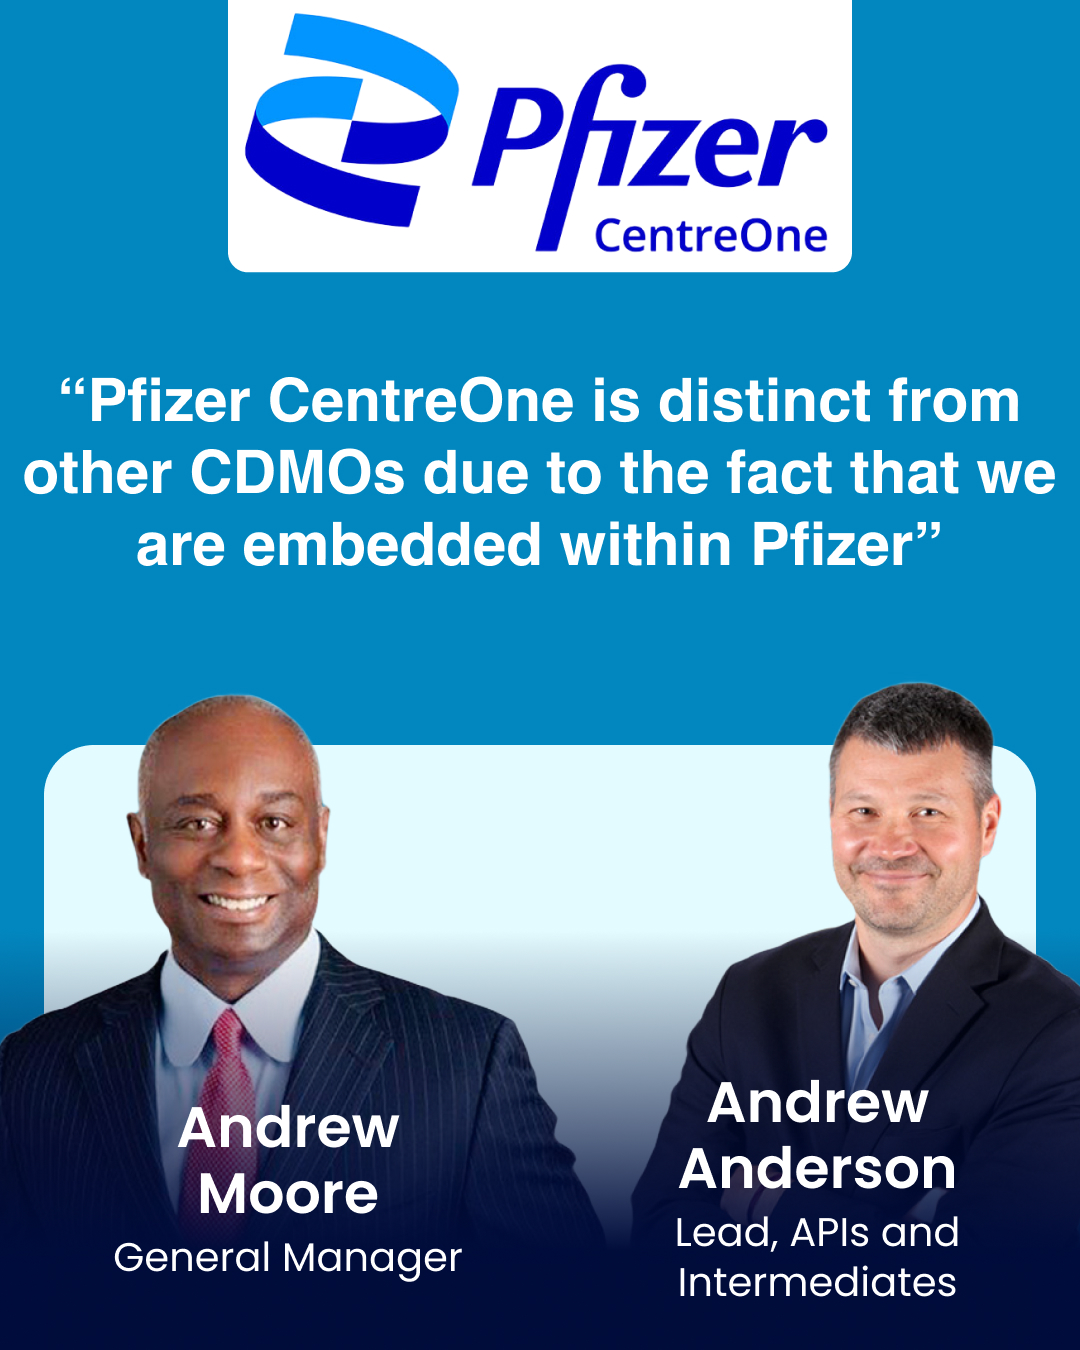 “Pfizer CentreOne is distinct from other CDMOs due to the fact that we are embedded within Pfizer”